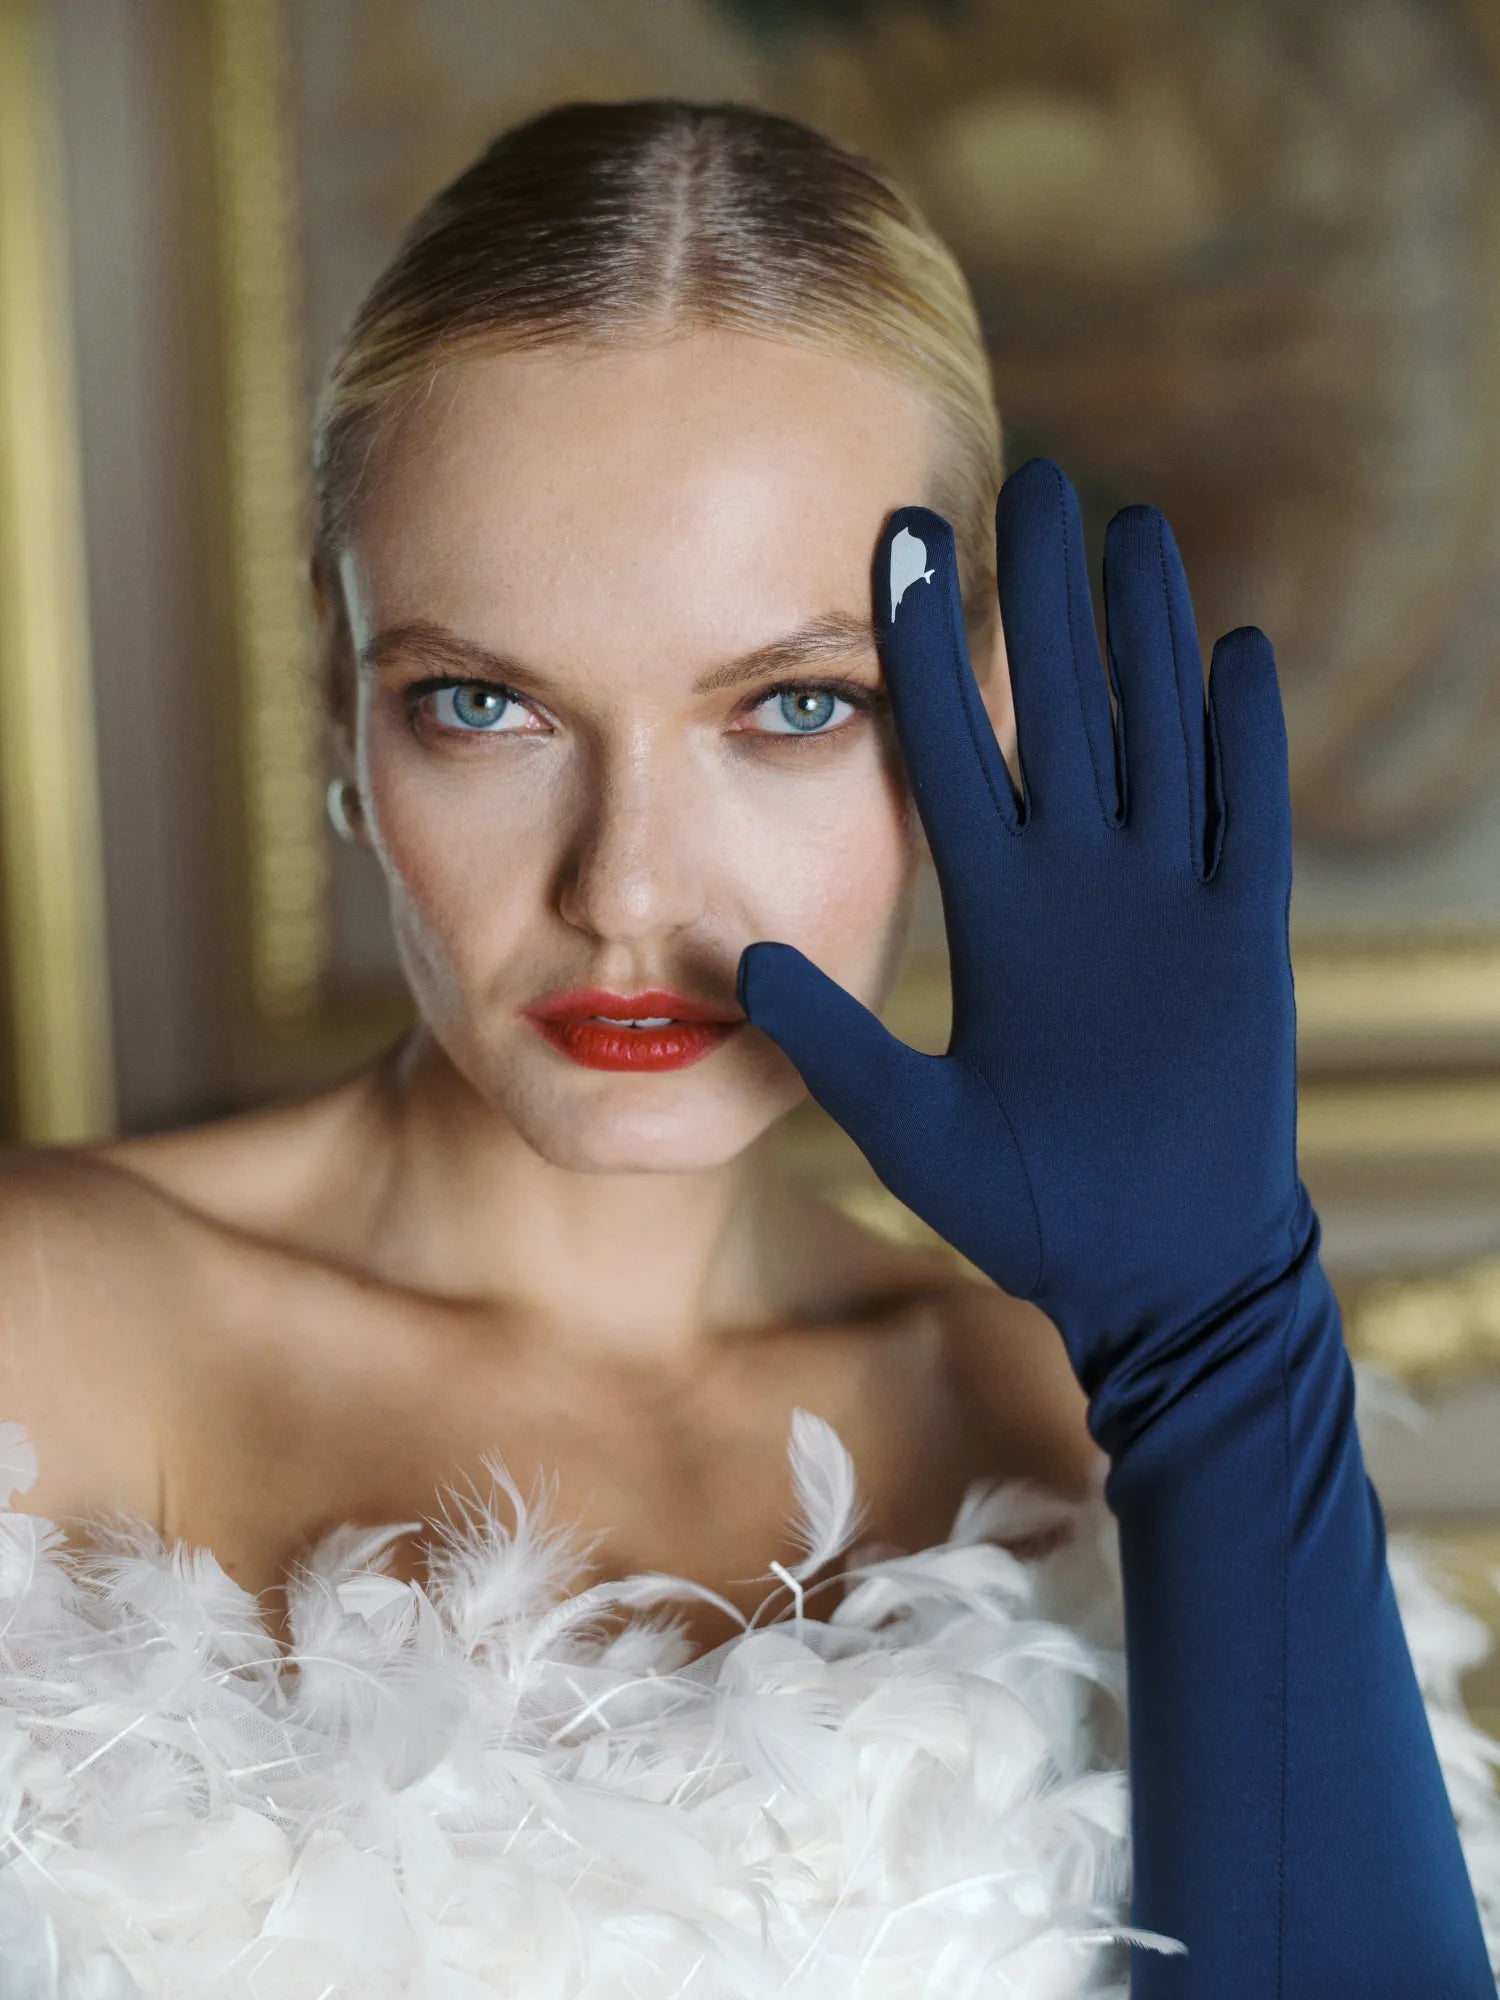 Glamorous woman wearing over the elbow blue opera gloves with palm open to show technology touchscreen index finger.